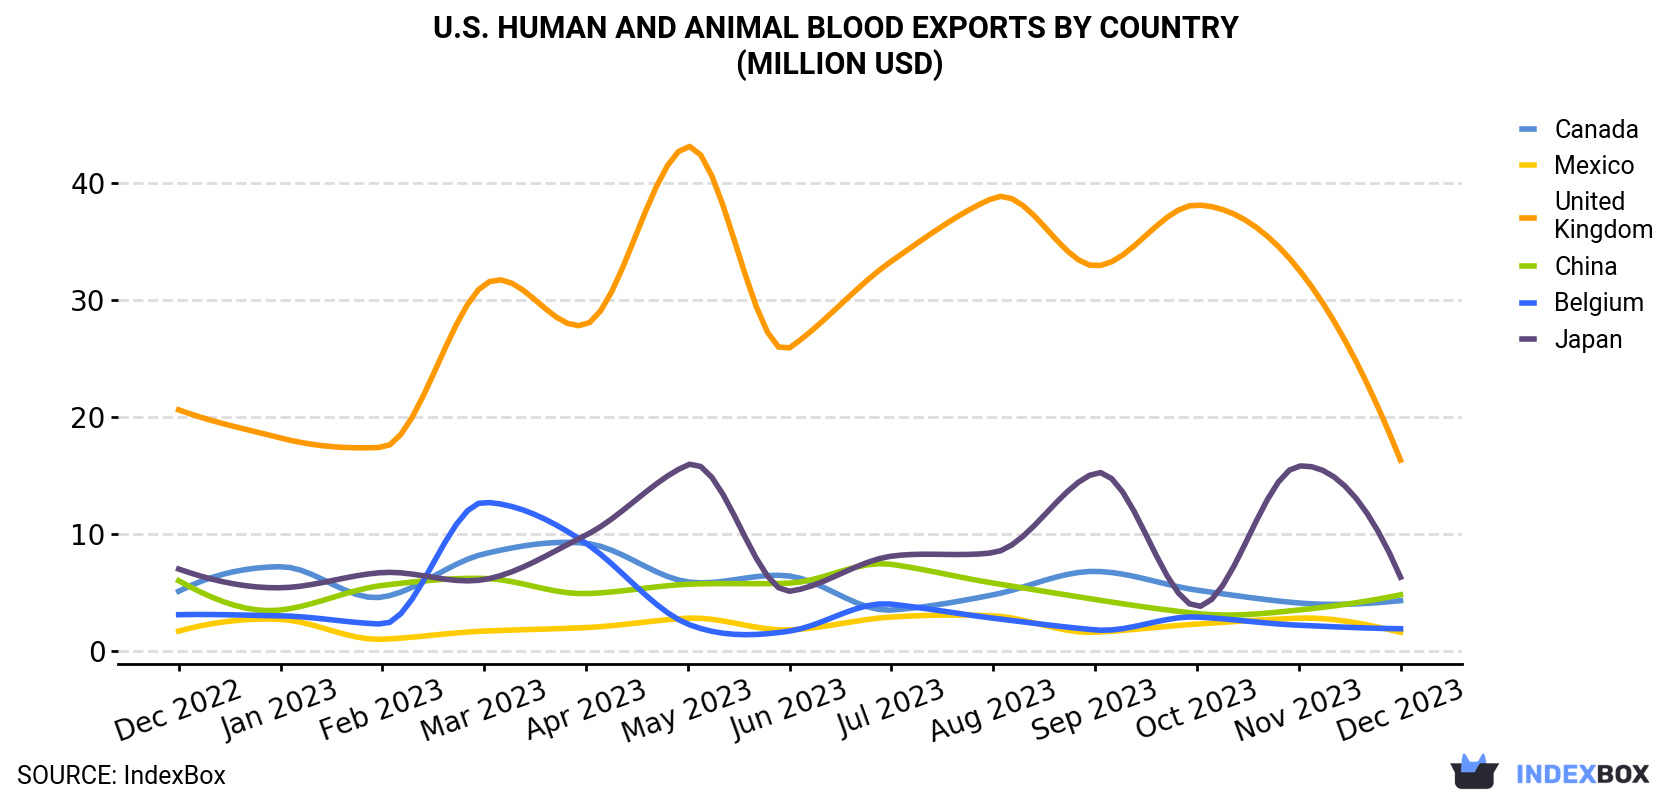 U.S. Human And Animal Blood Exports By Country (Million USD)